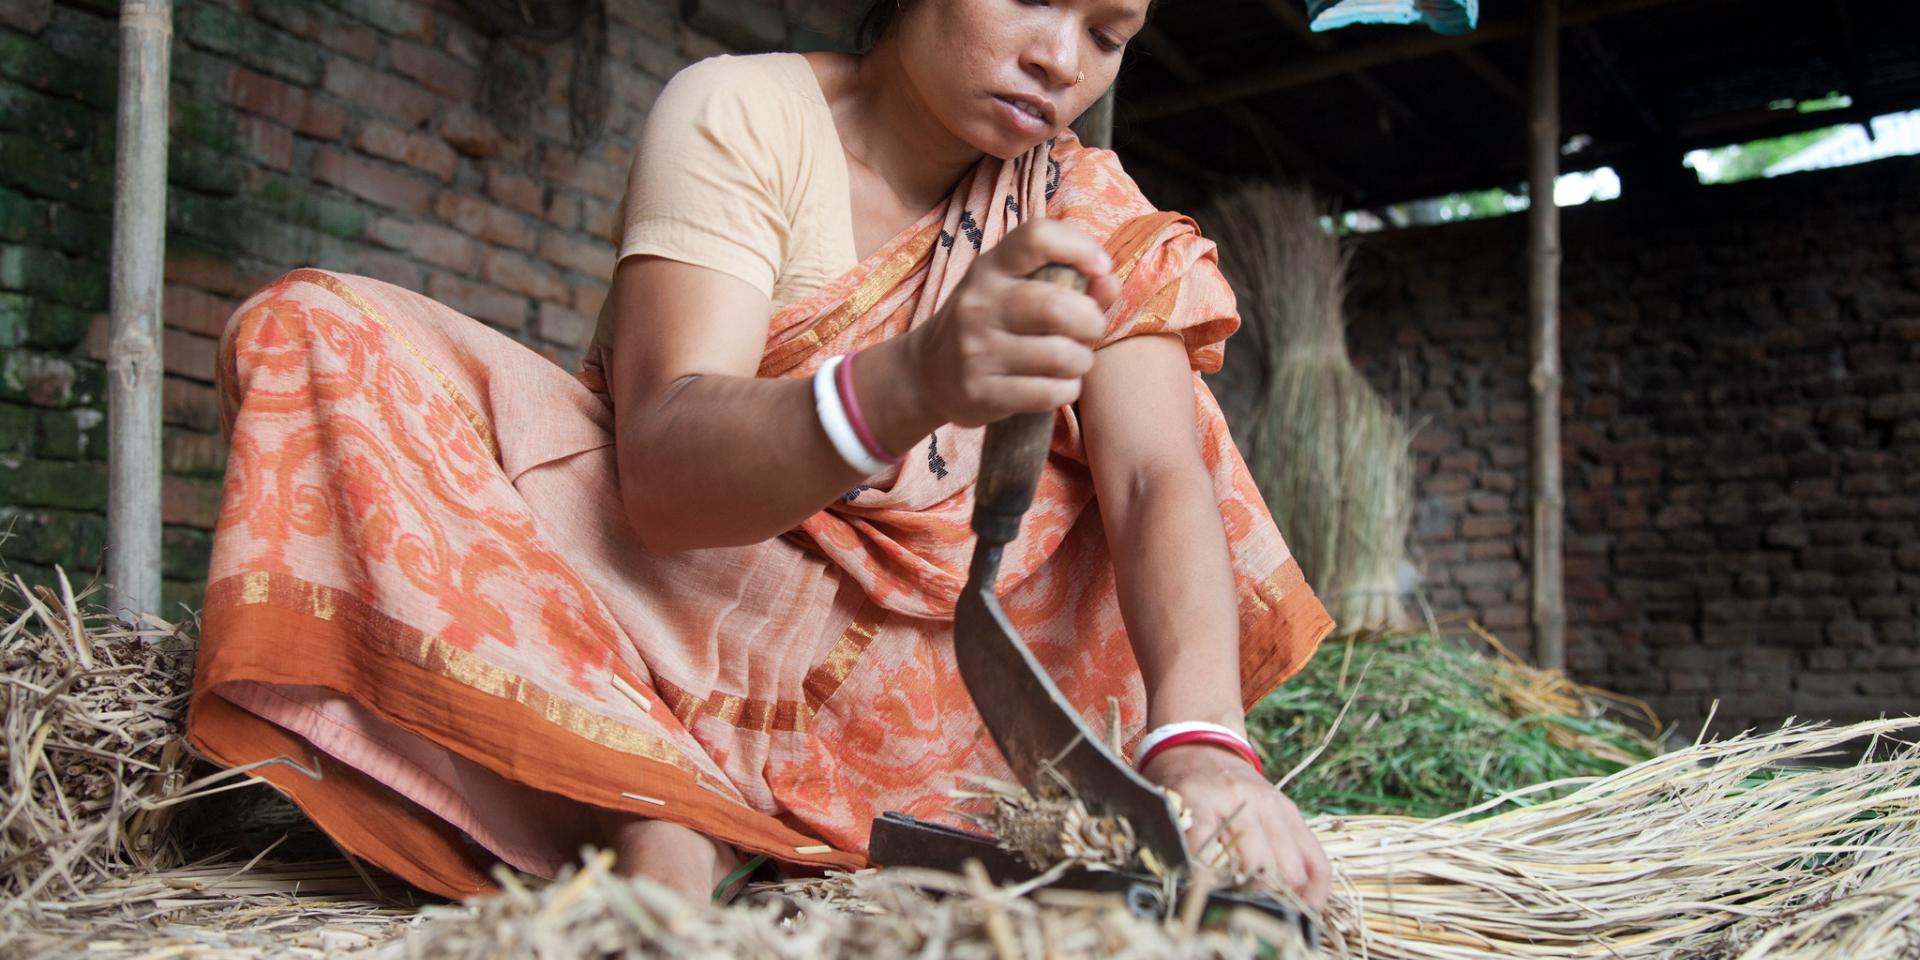 A Bangladeshi woman cuts up feed for her family's livestock